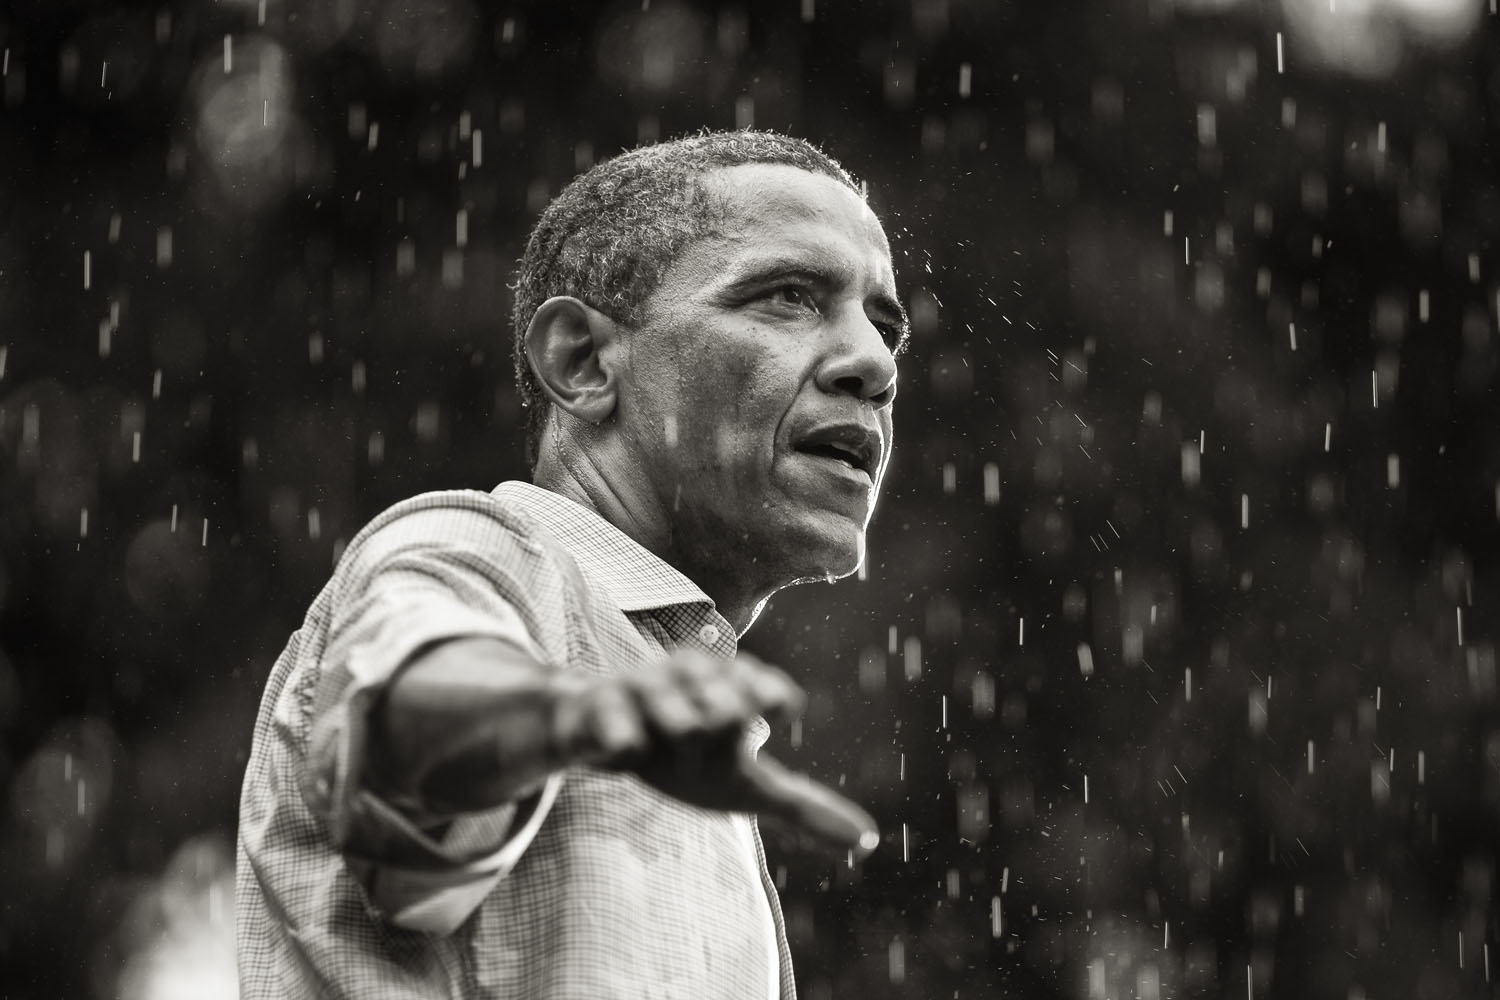 Image: President Obama speaks in the rain during a campaign rally in Glen Allen, Va. July 14, 2012.